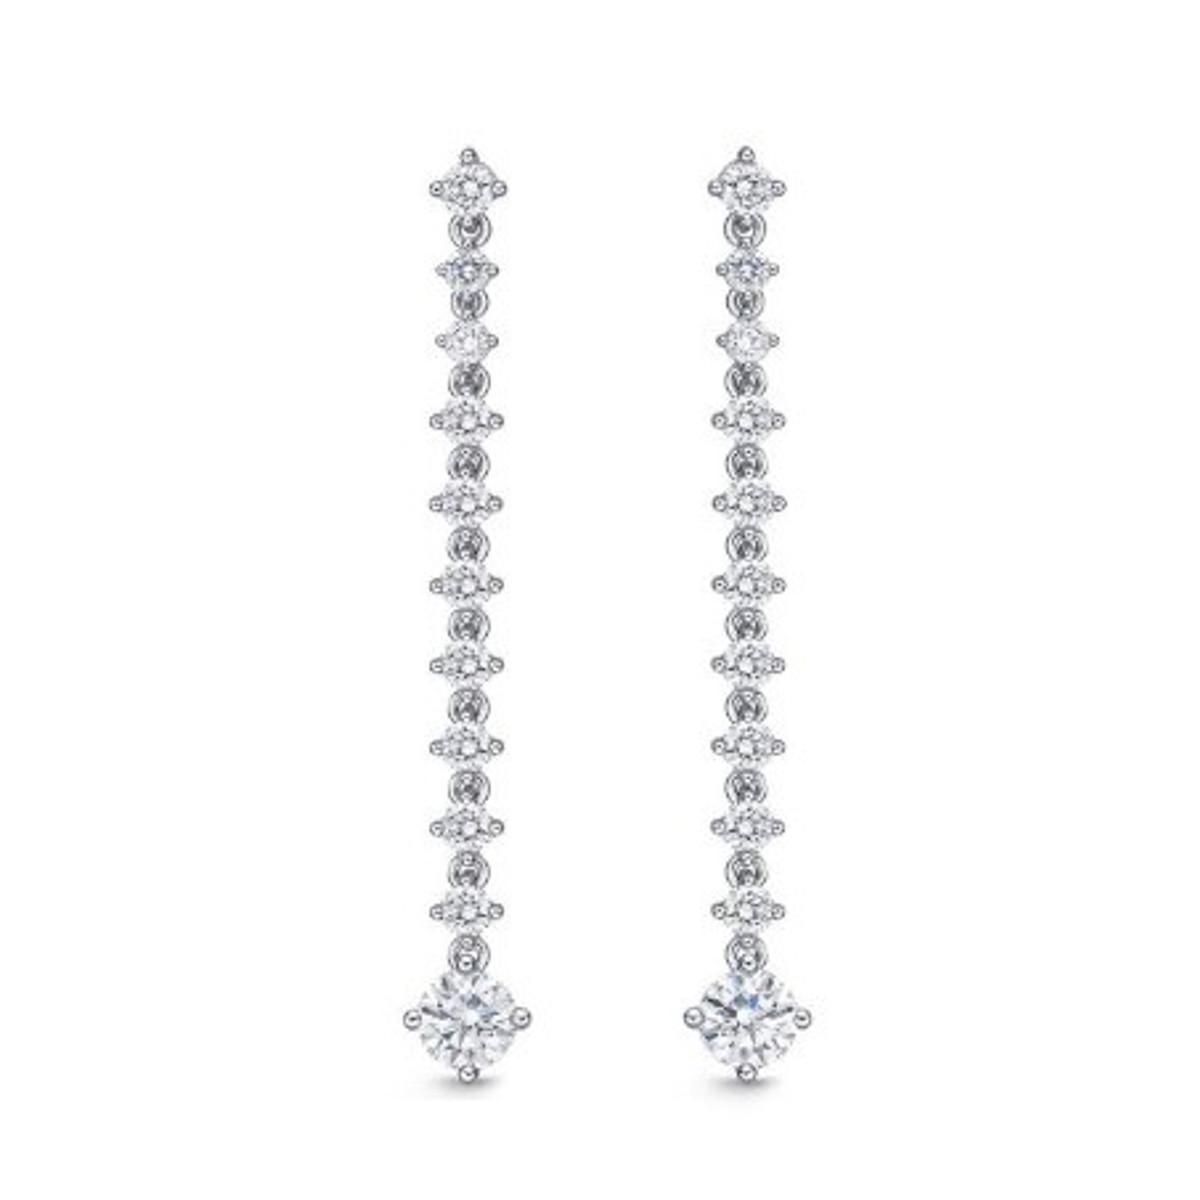 Hyde Park Collection 18K White Gold Diamond Drop Earrings-47884